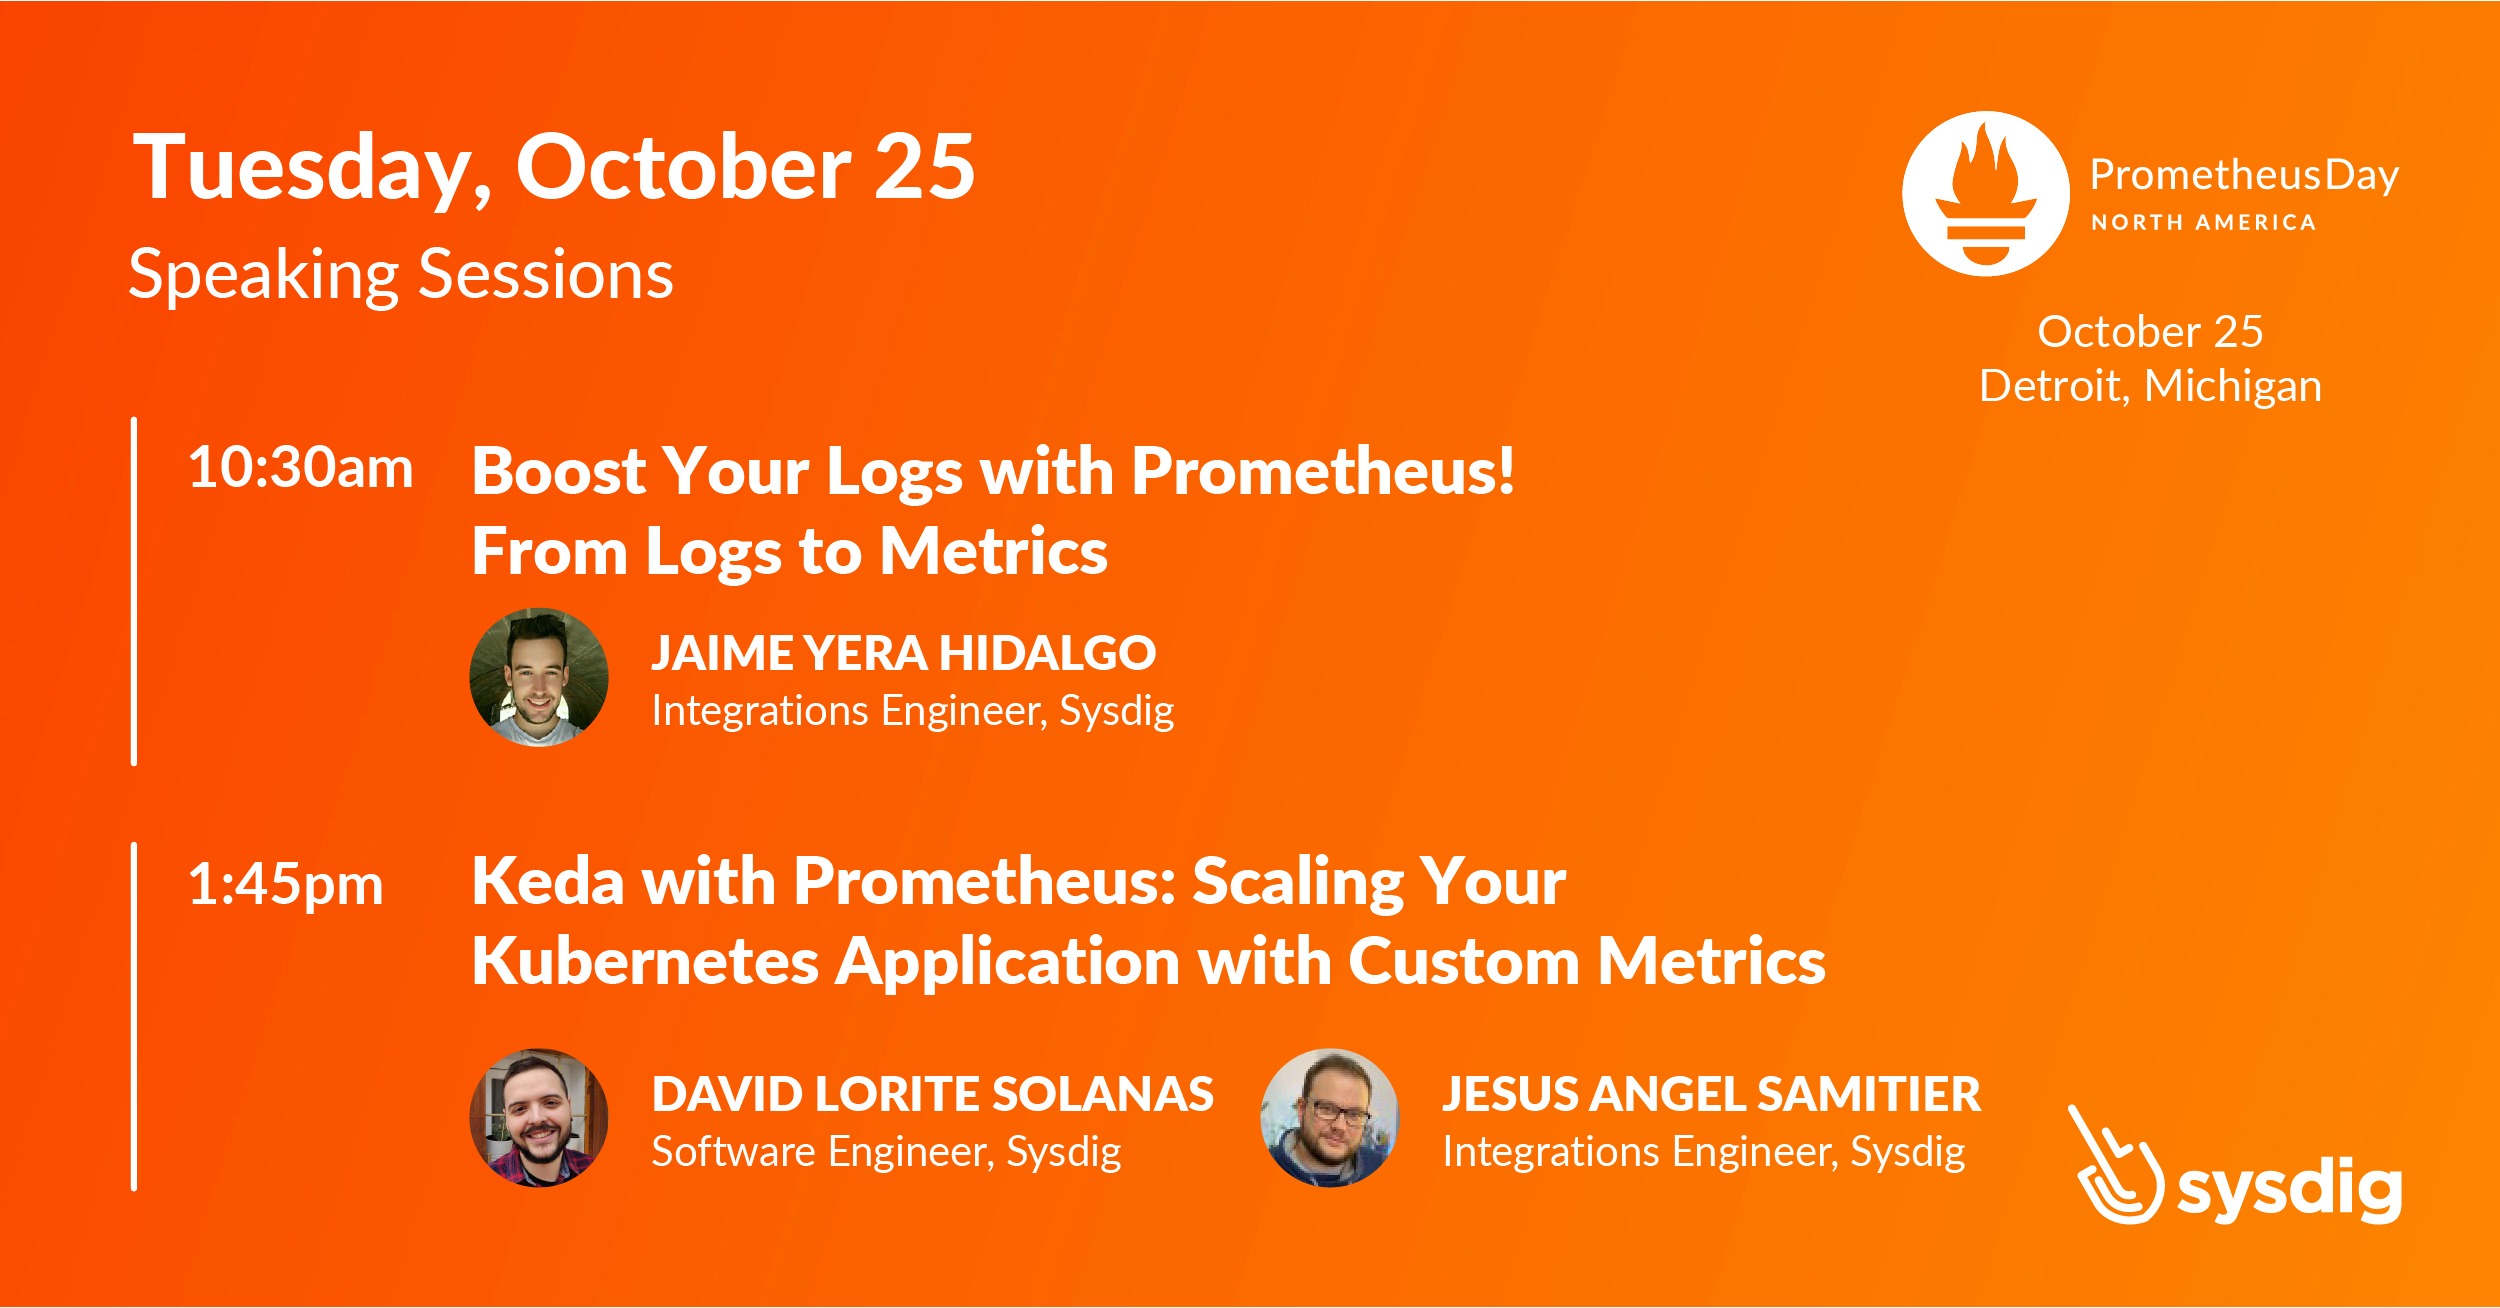 Orange card announcing speaking sessions at Prometheus Day of KubeCon North America: Boost your logs with Prometheus! From Logs to Metrics, at 10:30 am, and Keda with Prometheus: Scaling Your Kubernetes Application with Custom Metrics at 1:45 on Tuesday, Oct. 25